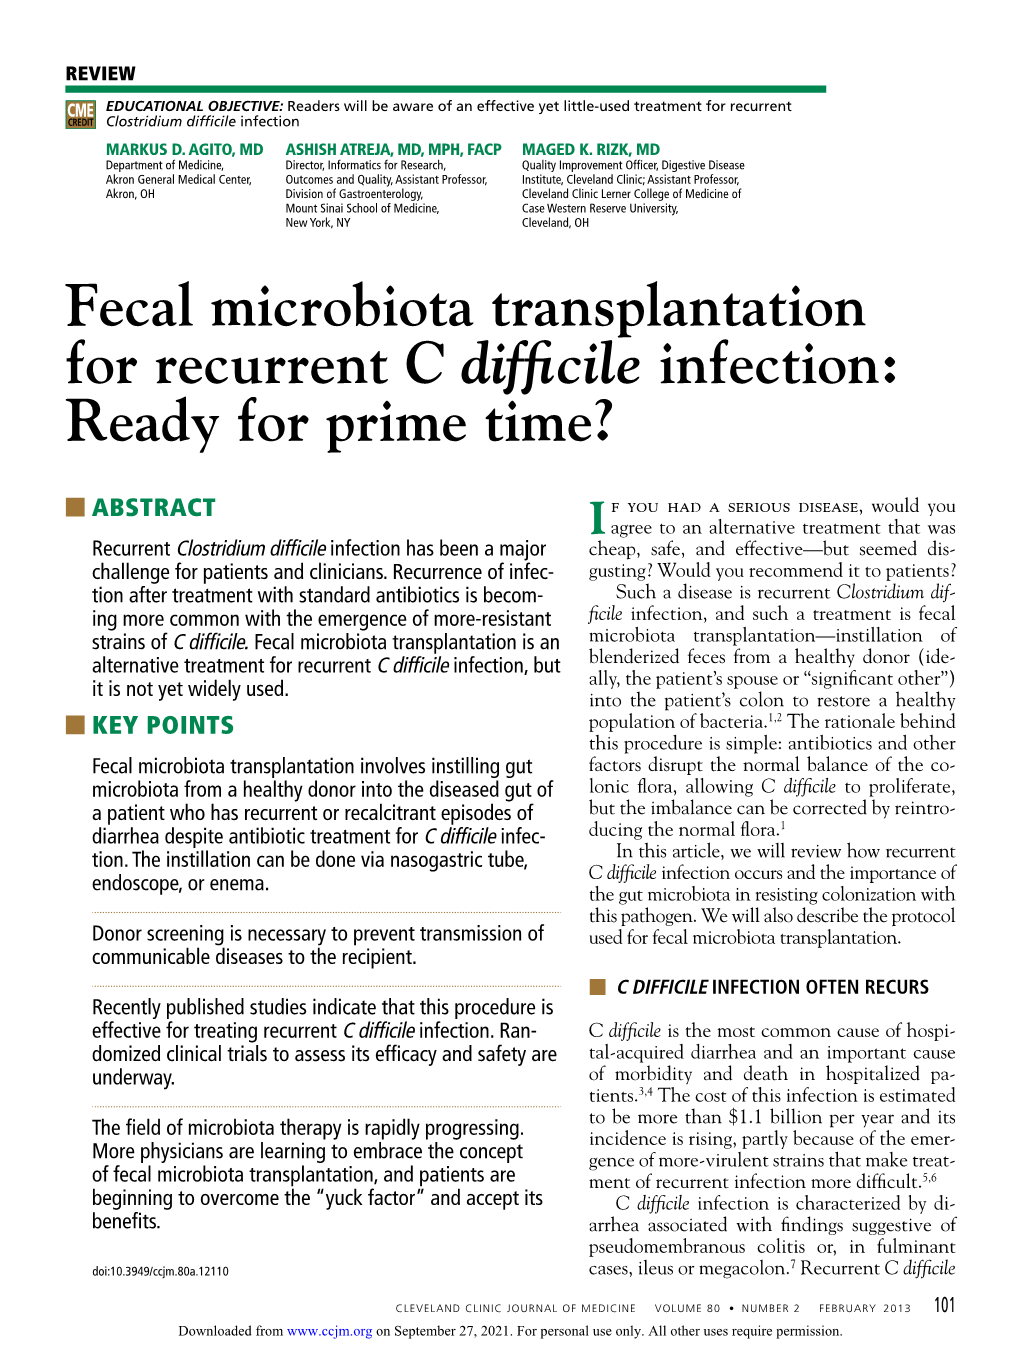 Fecal Microbiota Transplantation for Recurrent C Difficile Infection: Ready for Prime Time?